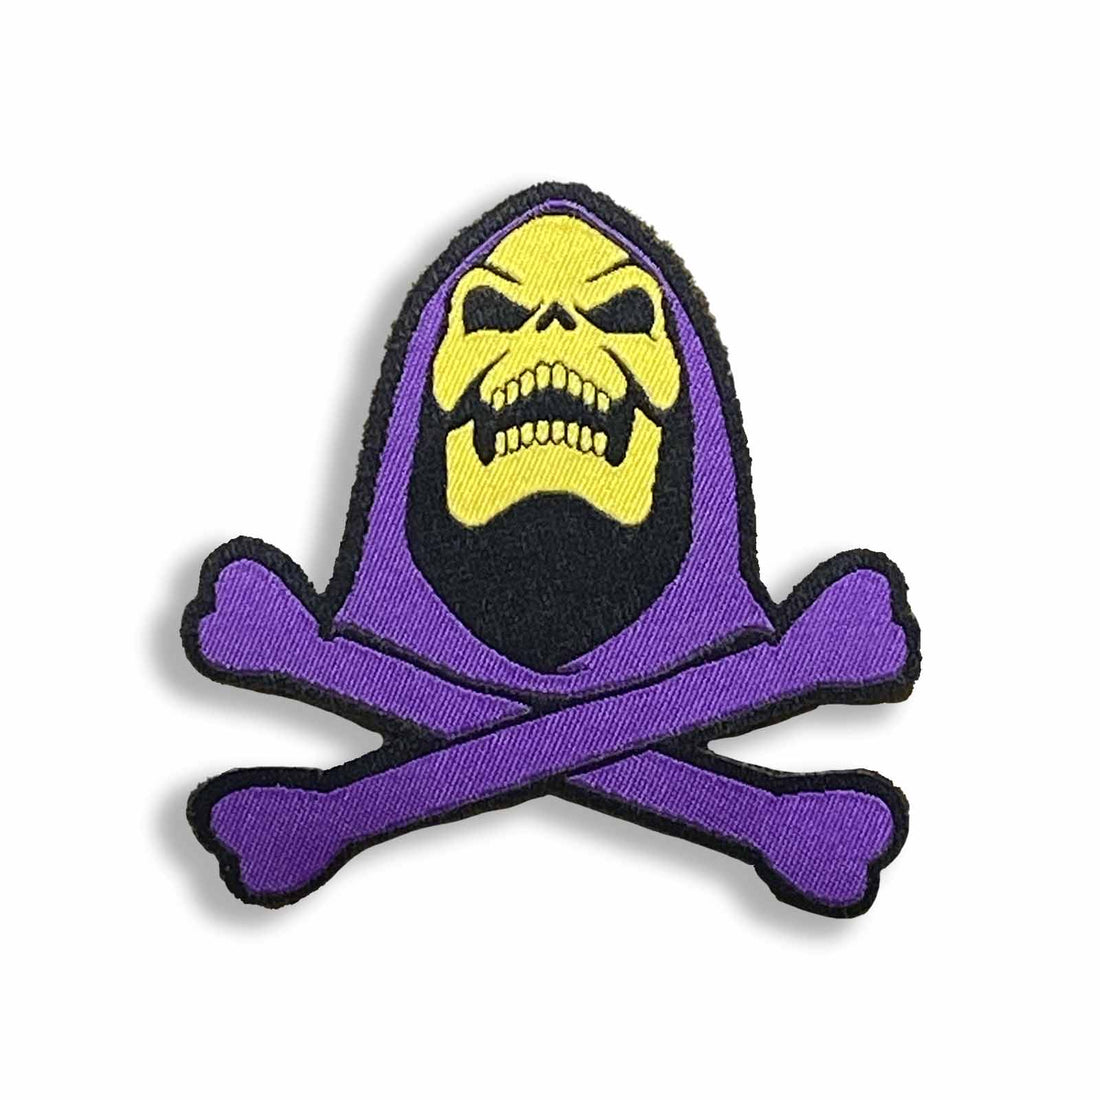 Supplies - Identification - Morale Patches - Tactical Outfitters Skeletor Crossbones Morale Patch